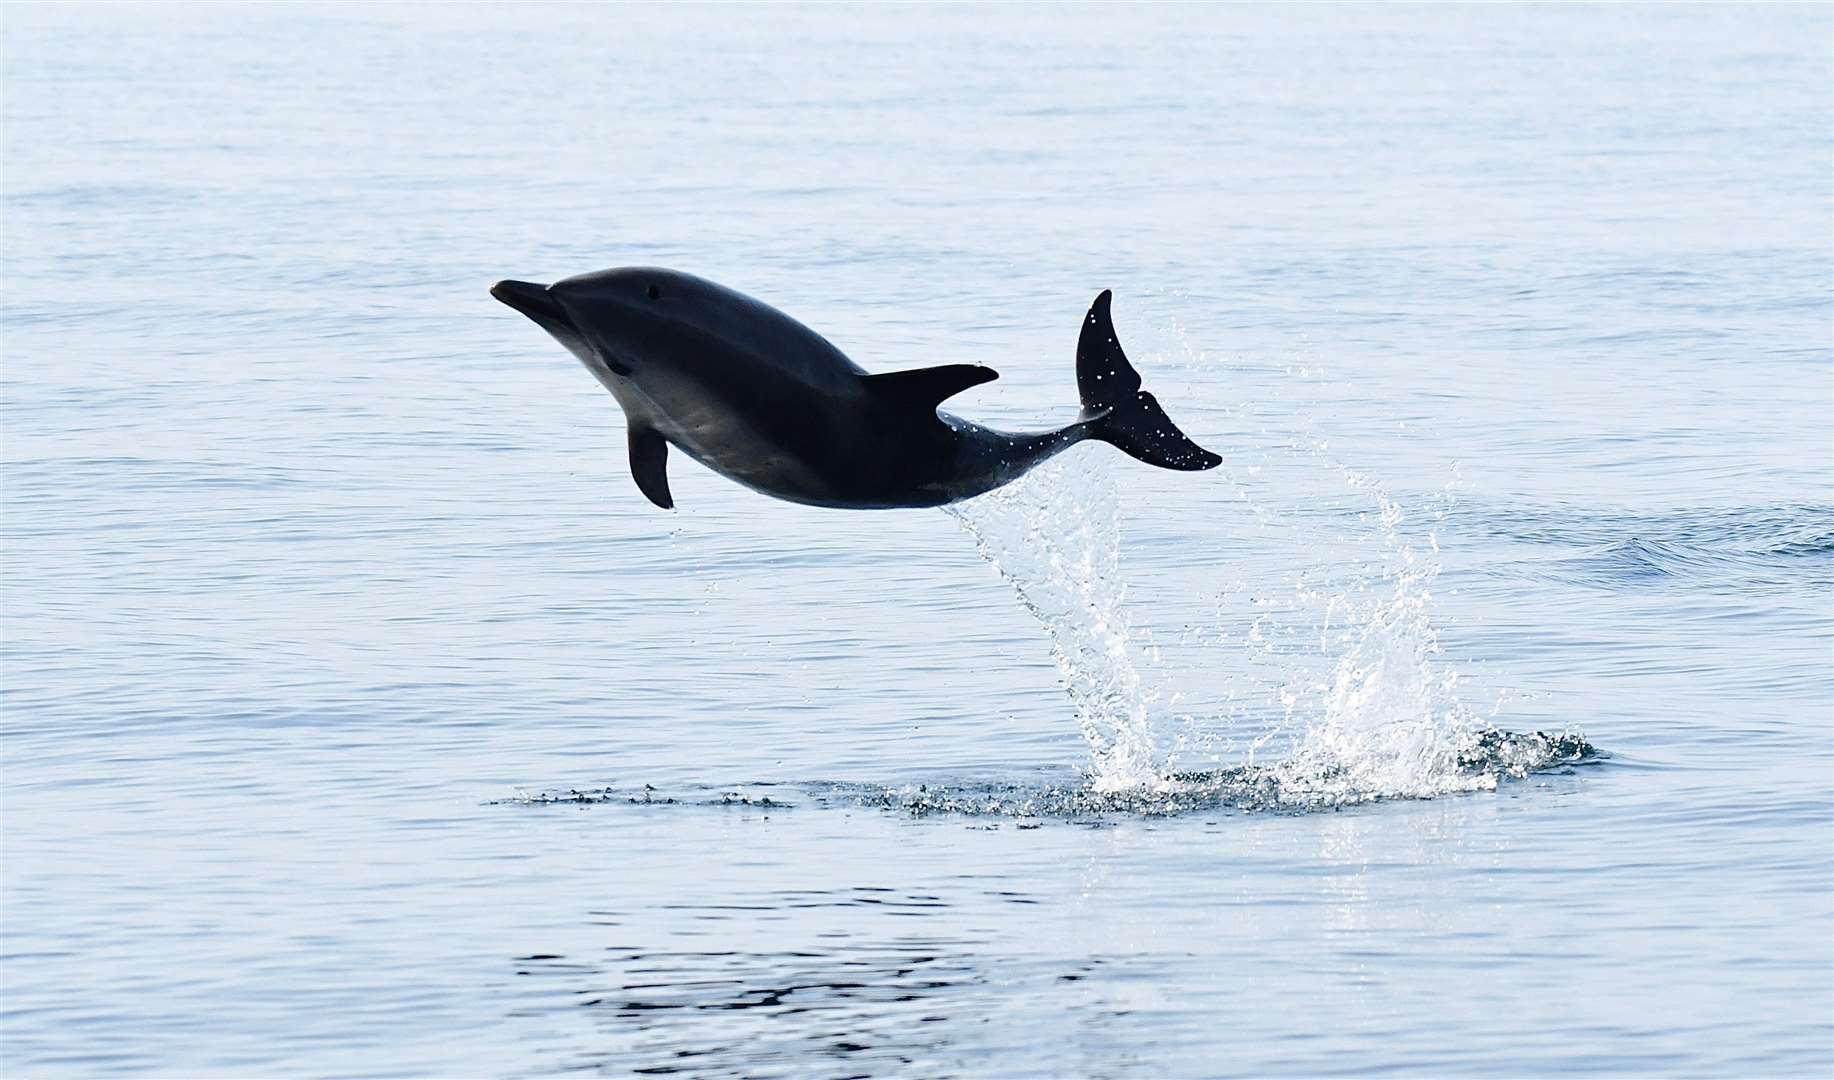 One of the dancing dolphins captured by former Dornoch man Chris Murray.